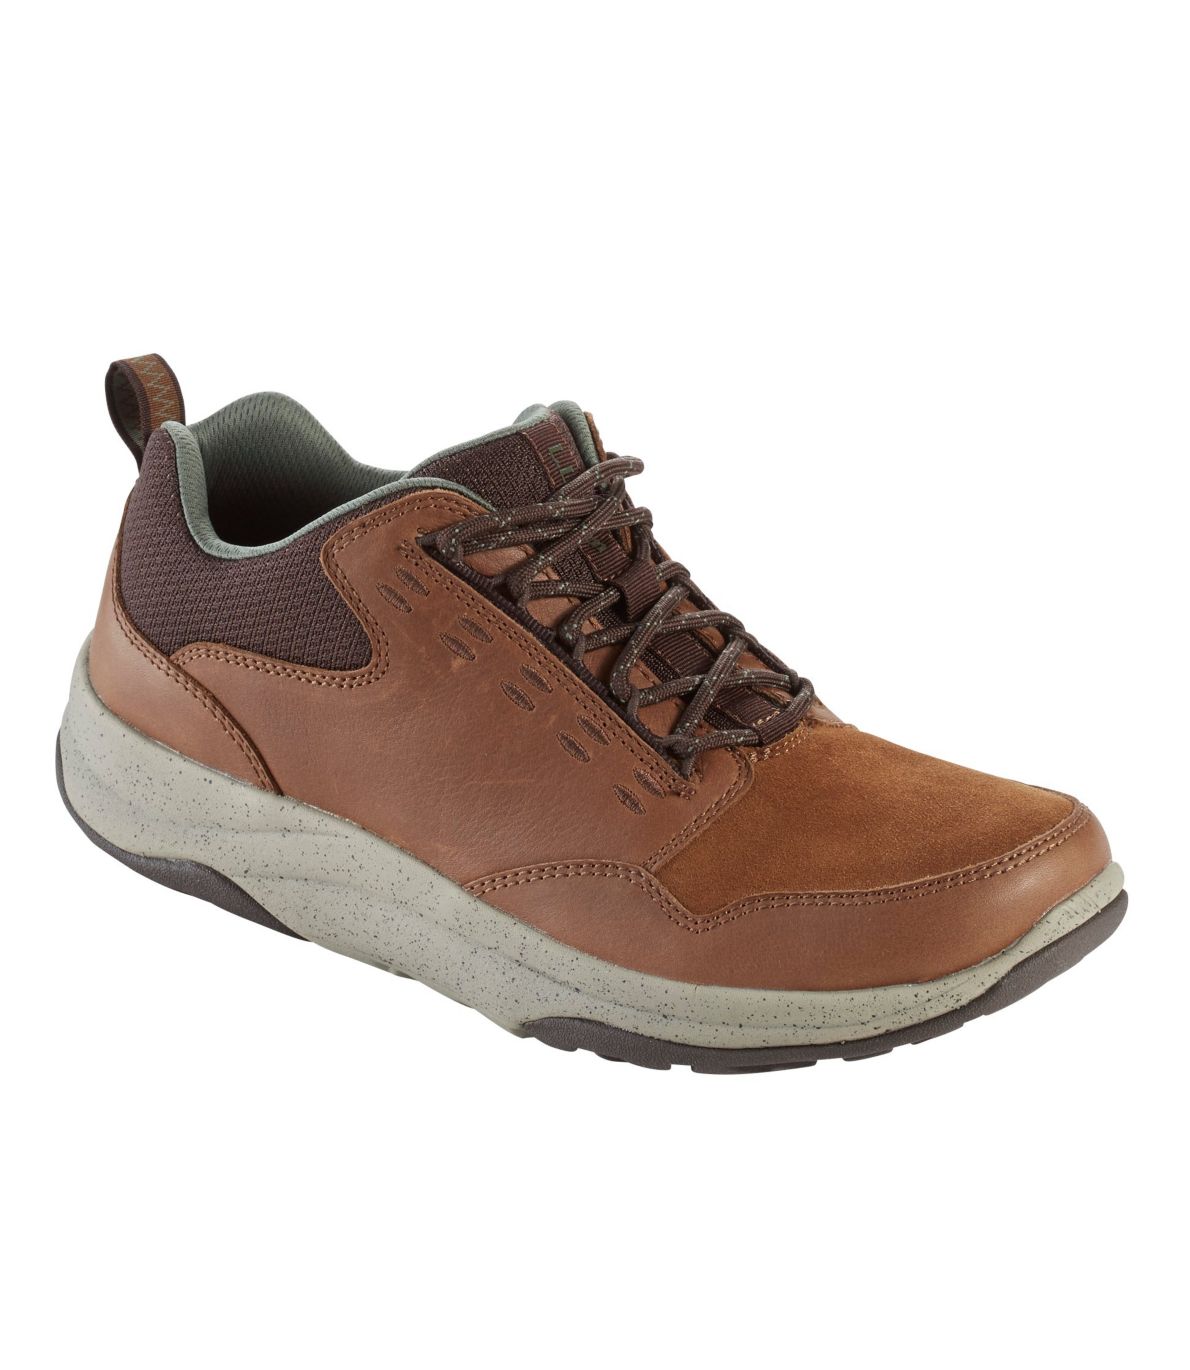 Men's Traverse Trail Sneakers, Leather/Suede